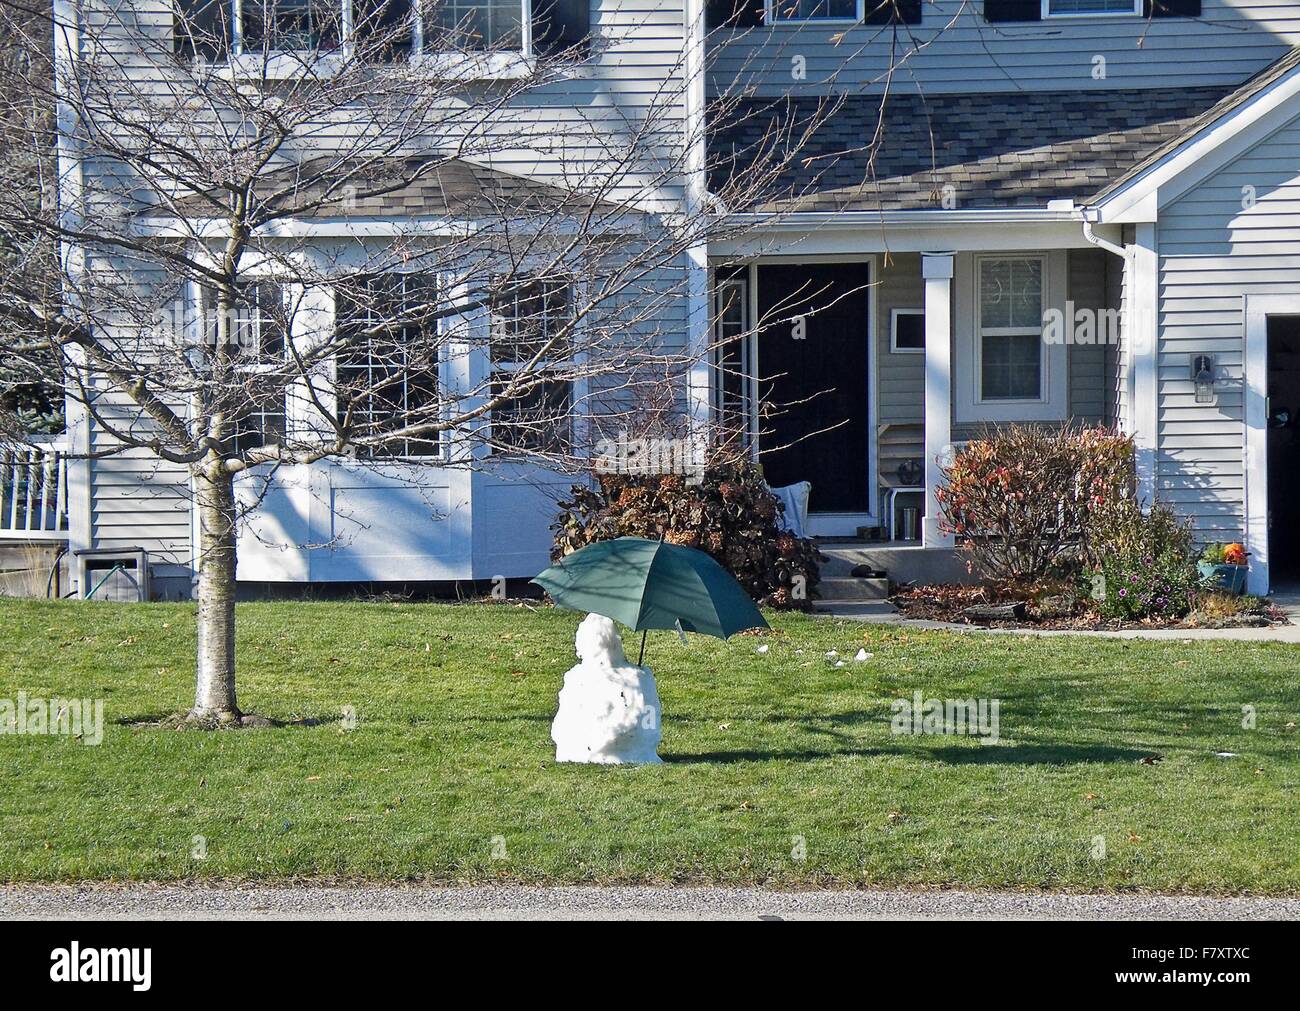 Melting snowman with green umbrella in front of suburban home. Stock Photo